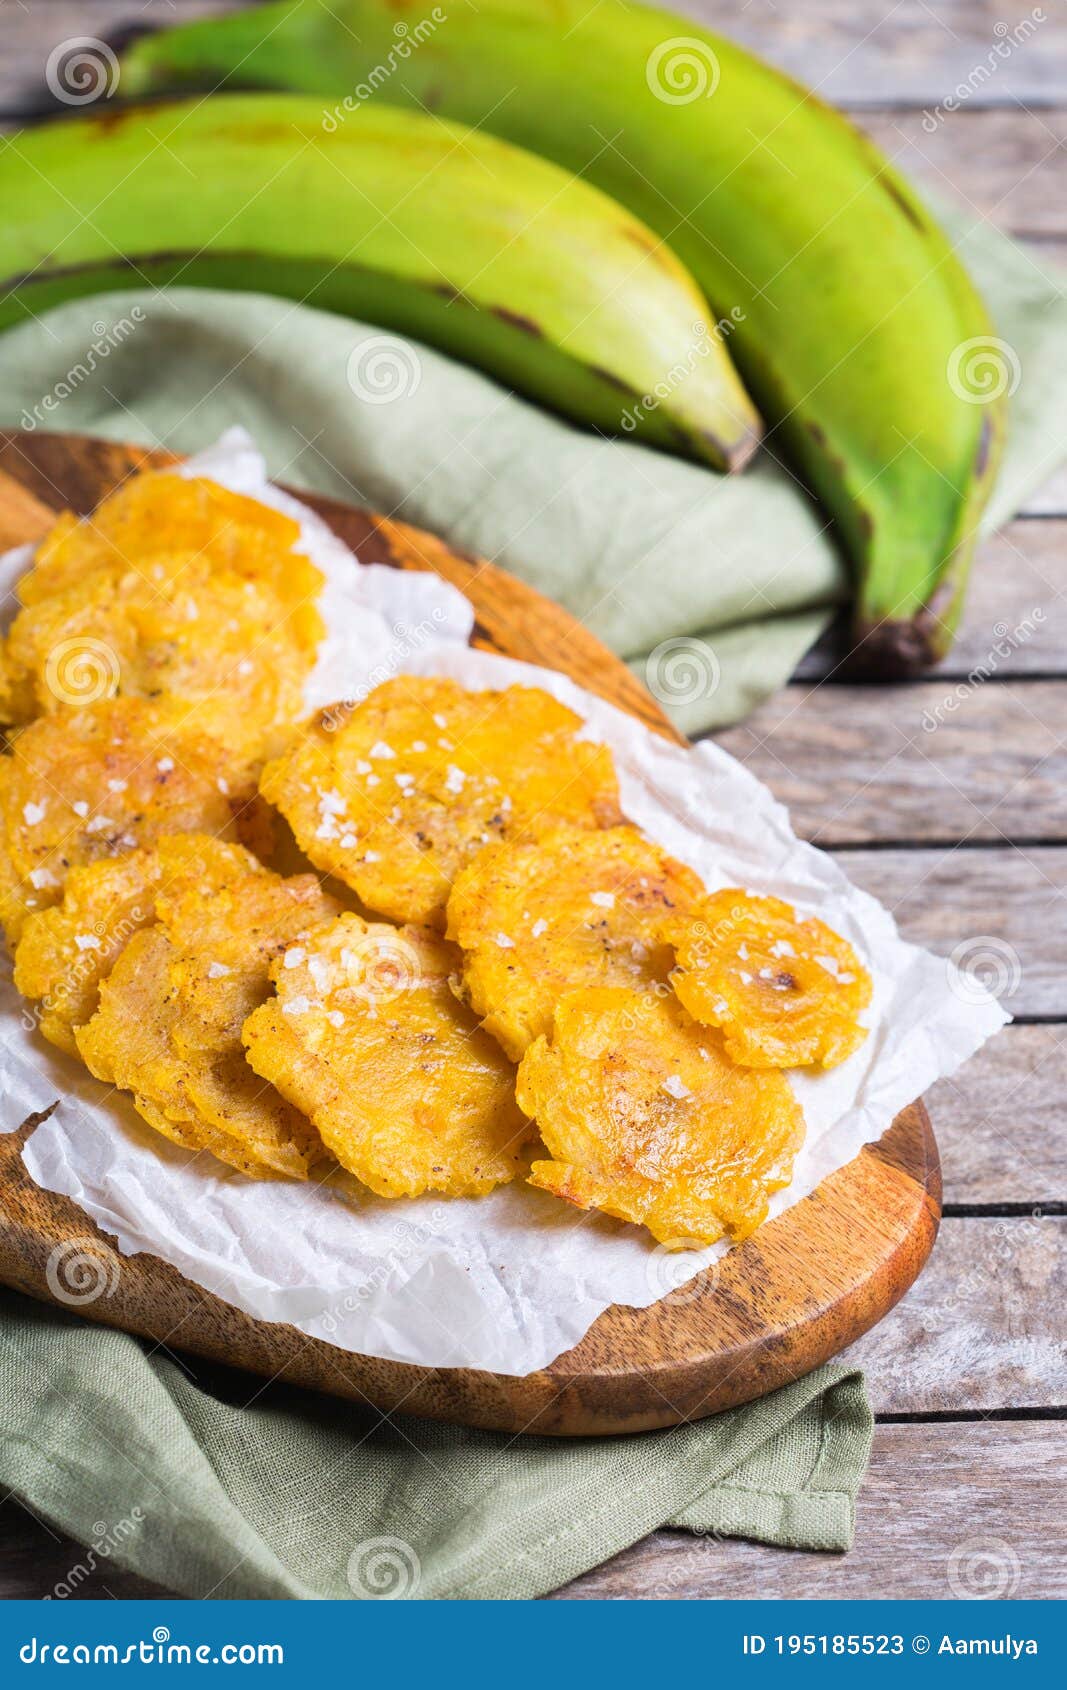 fried tostones, green plantains, bananas with guacamole sauce